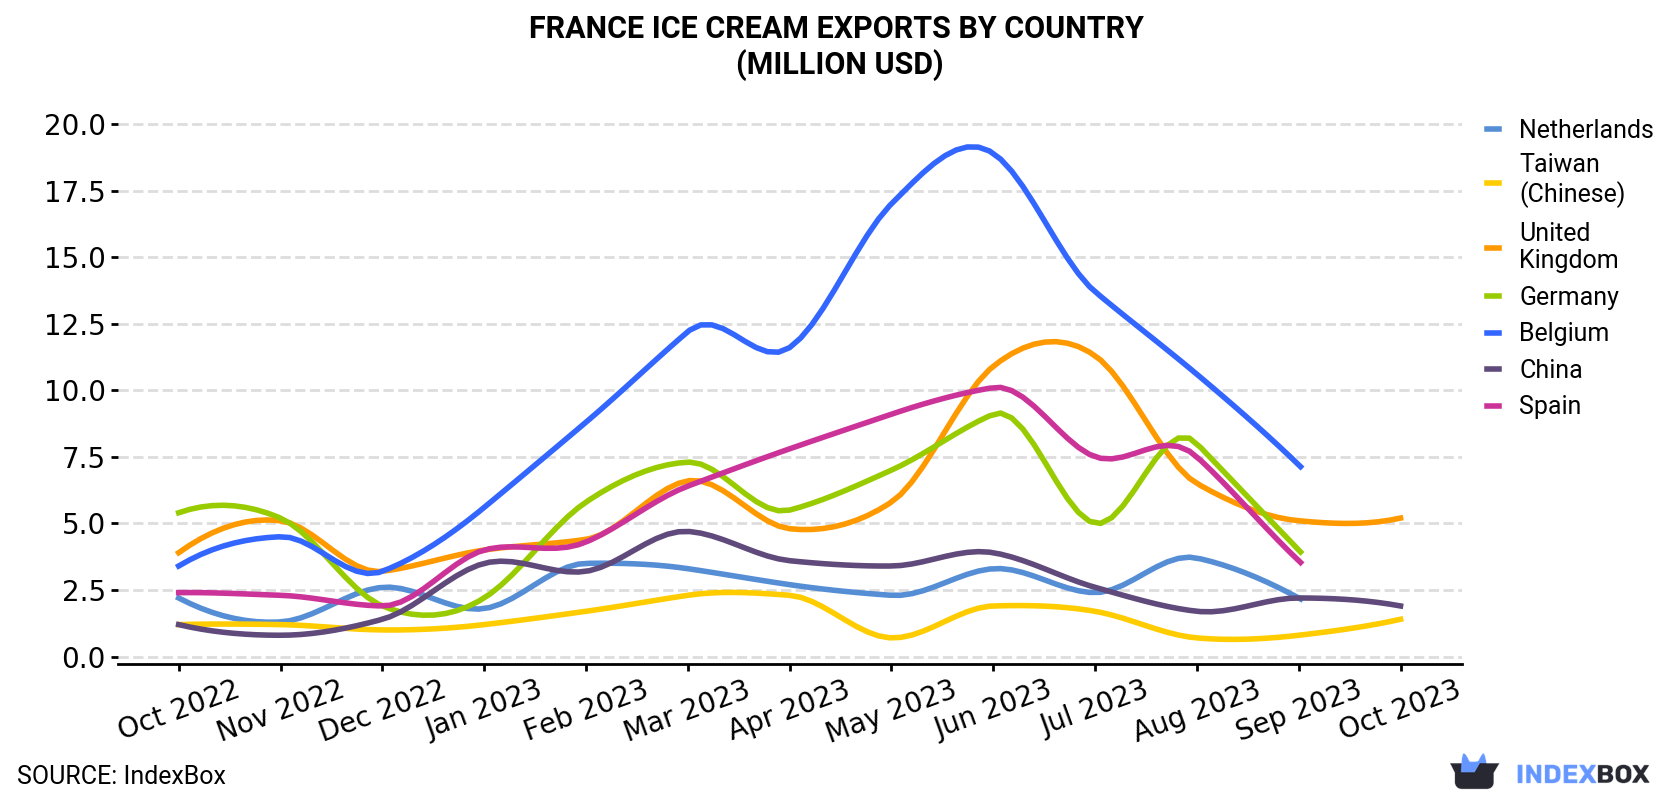 France Ice Cream Exports By Country (Million USD)